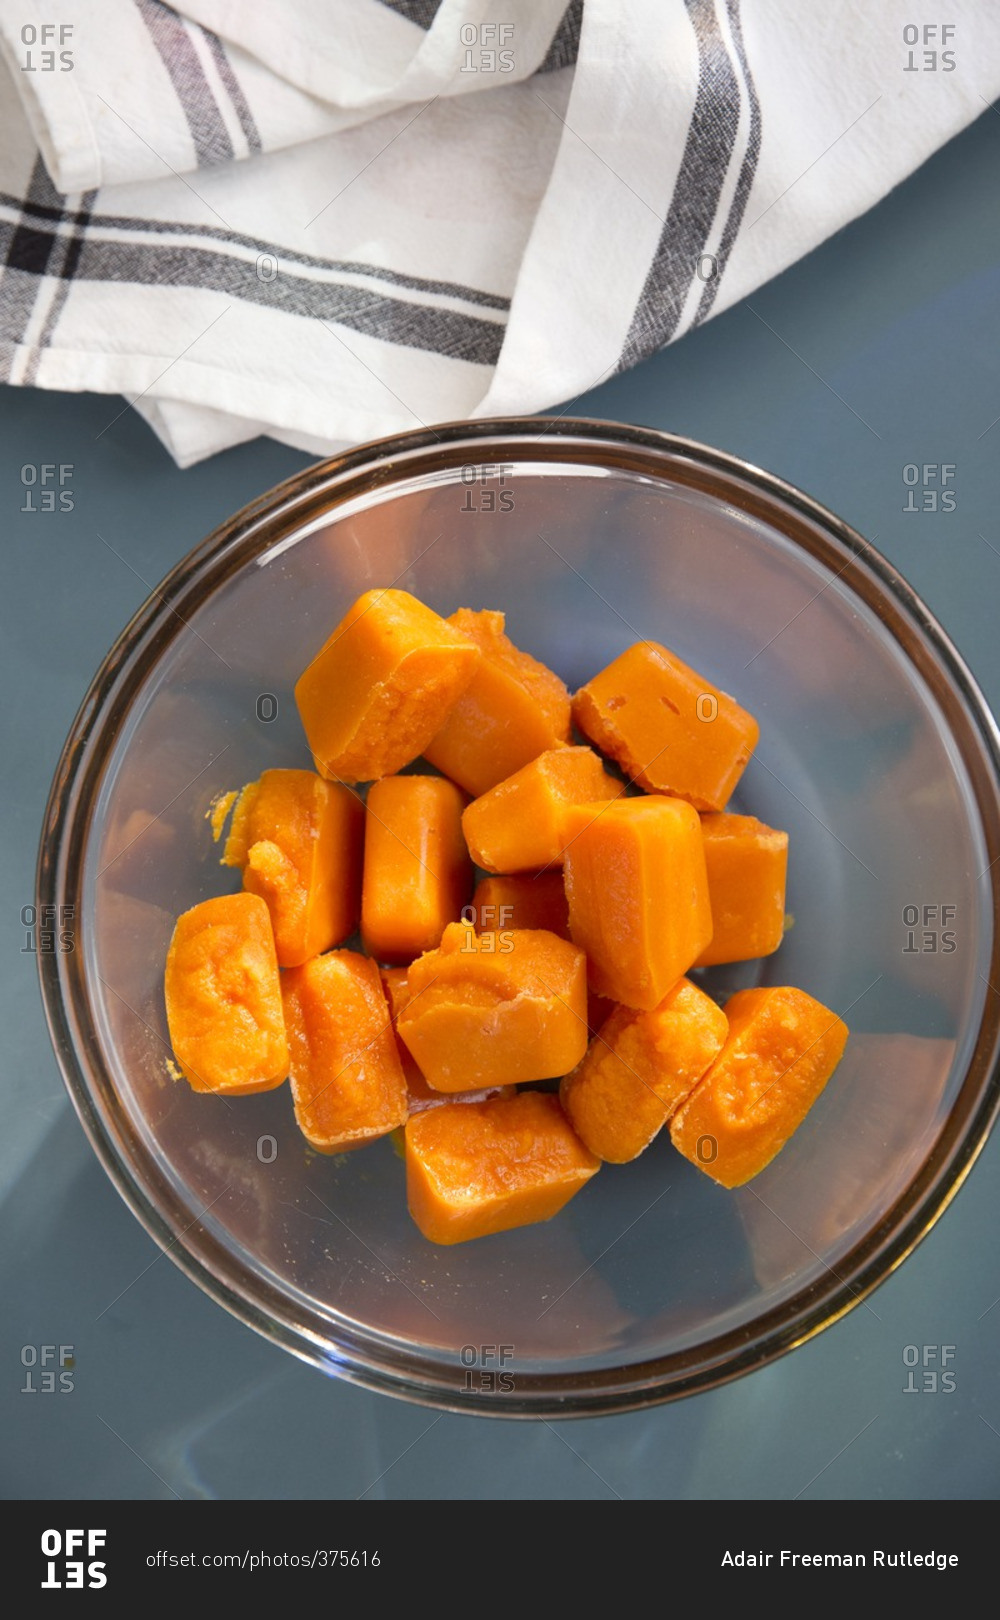 Frozen cubes of homemade baby food made from carrots in a glass bowl